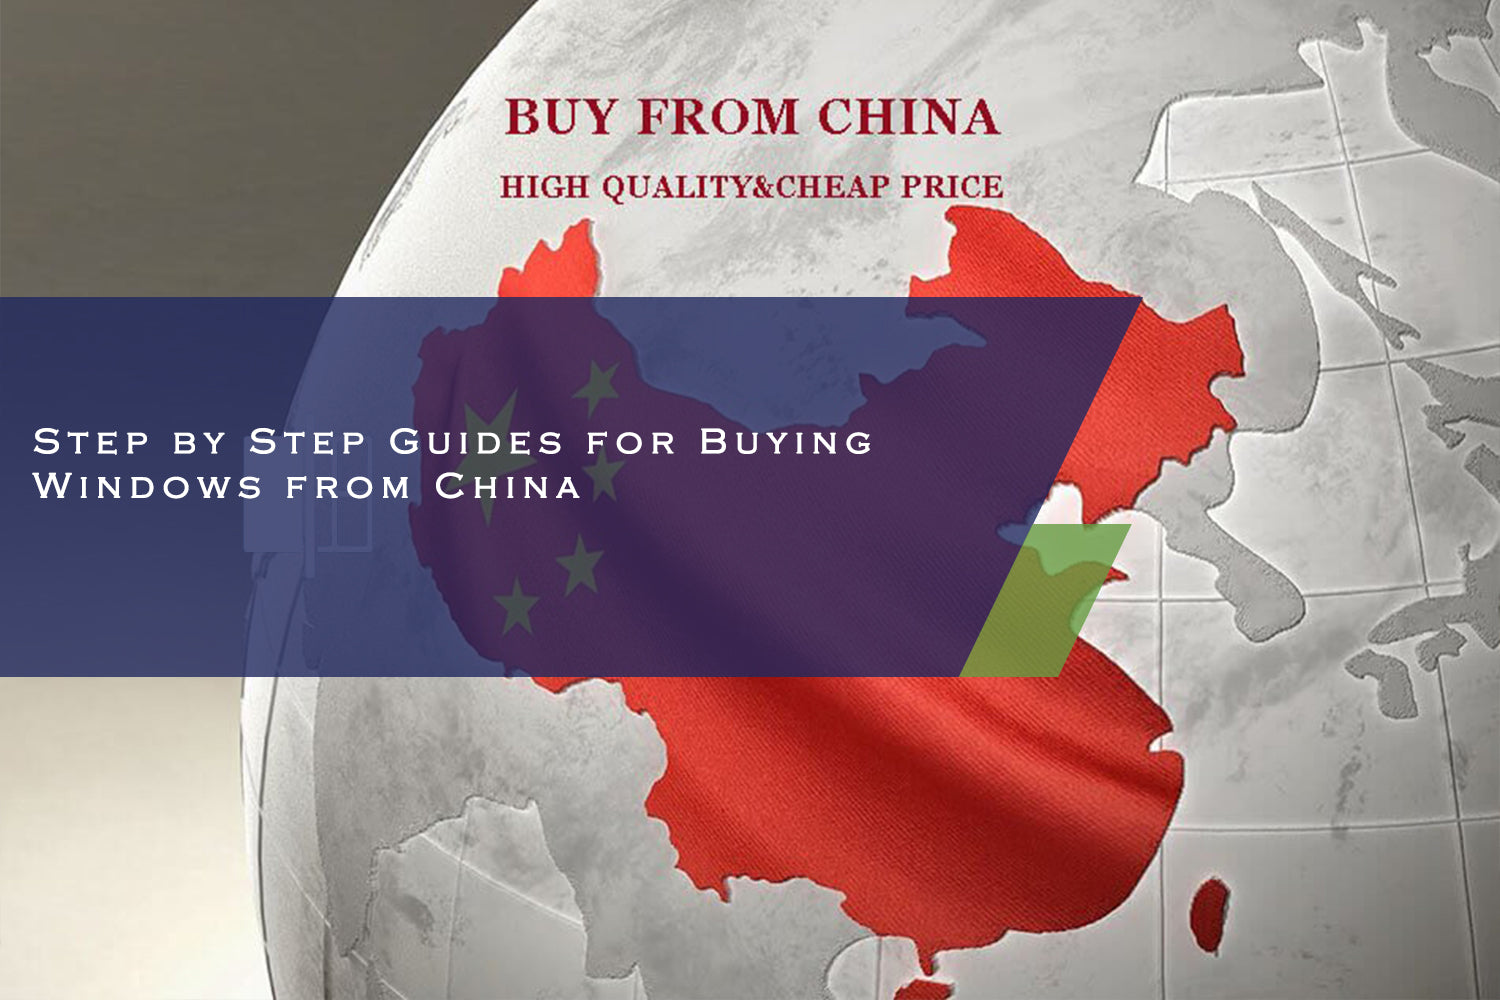 Step by Step Guides for Buying Windows from China